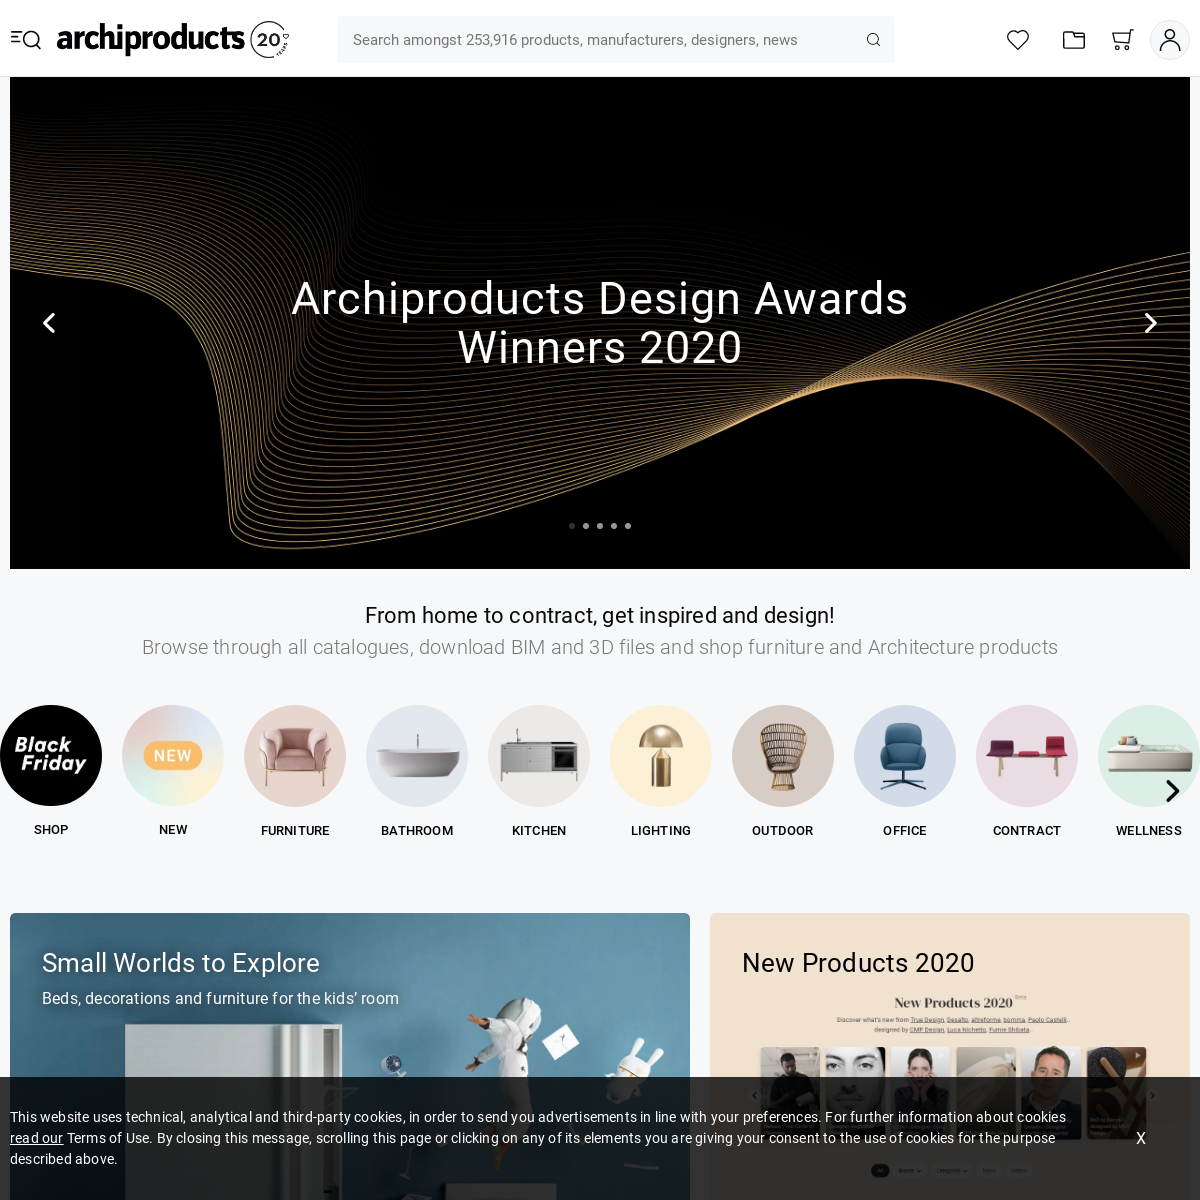 A complete backup of archiproducts.com